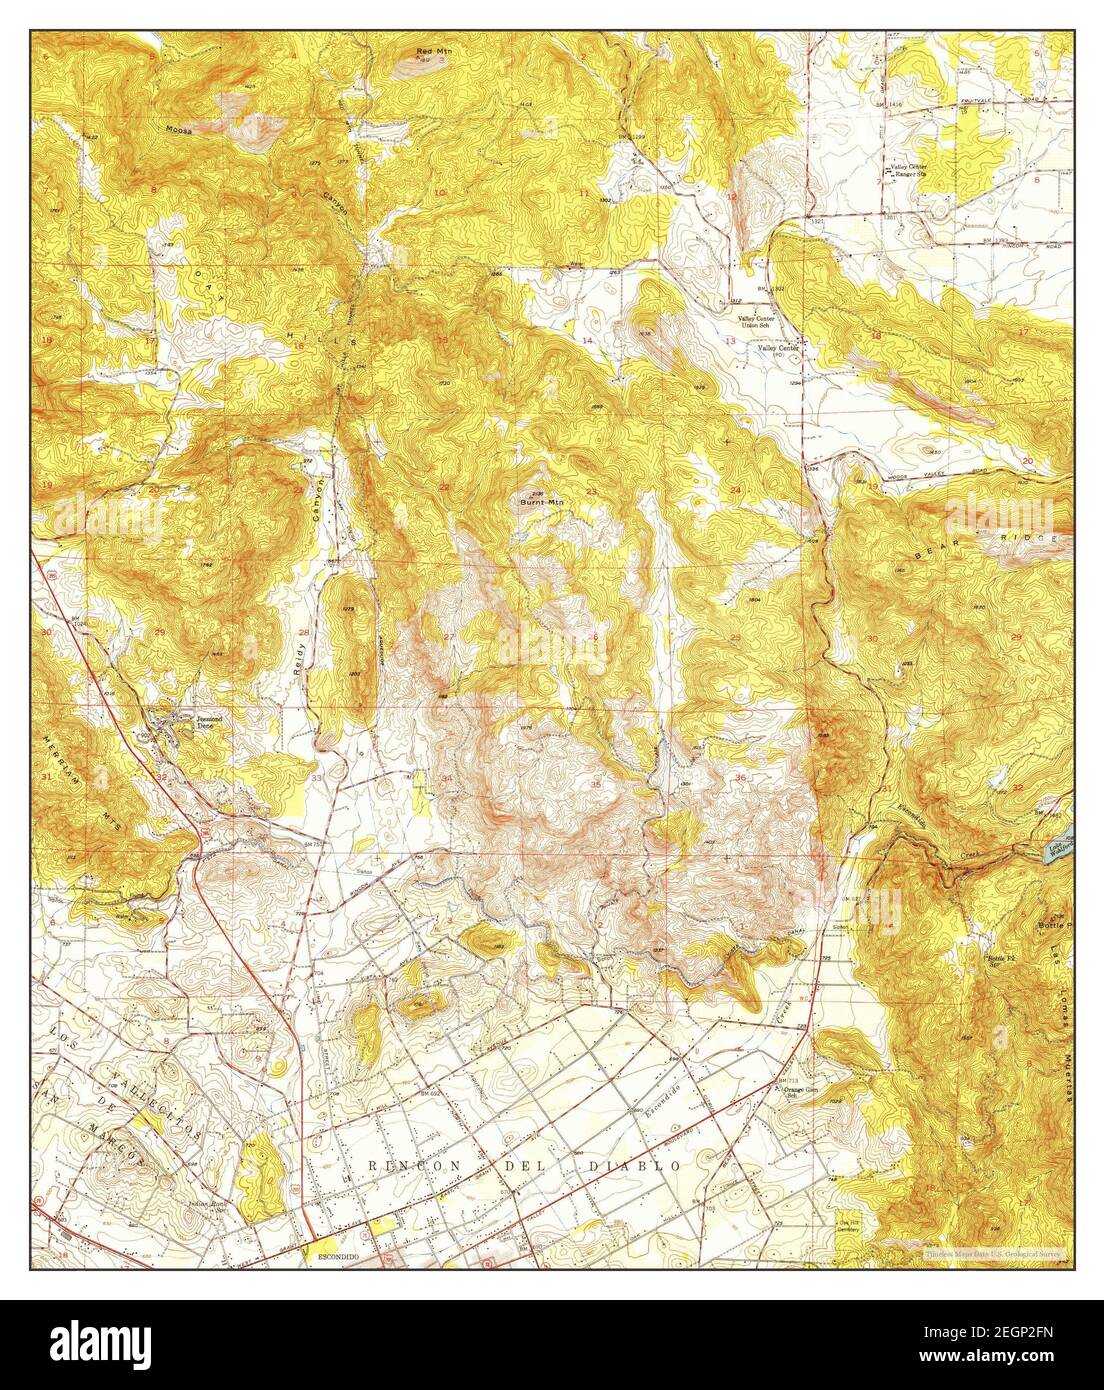 Valley Center, California, map 1949, 1:24000, United States of America by Timeless Maps, data U.S. Geological Survey Stock Photo